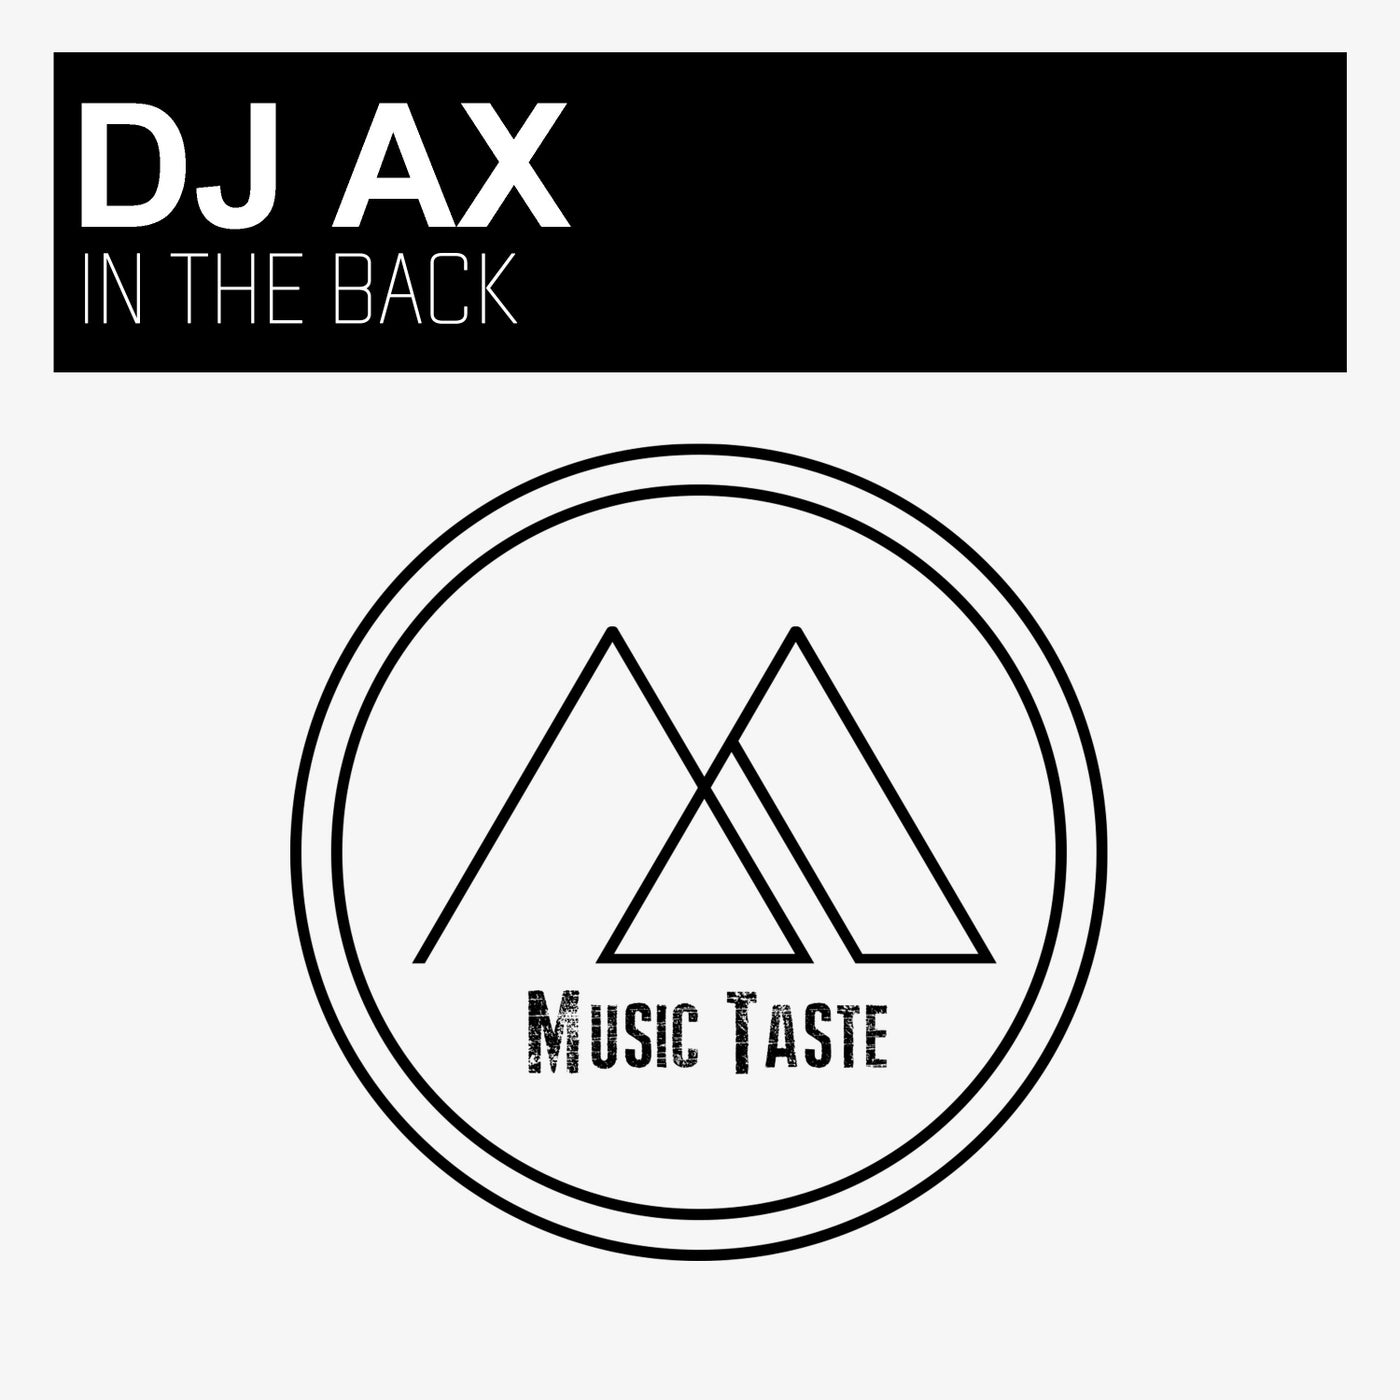 In The Back (Original Mix)